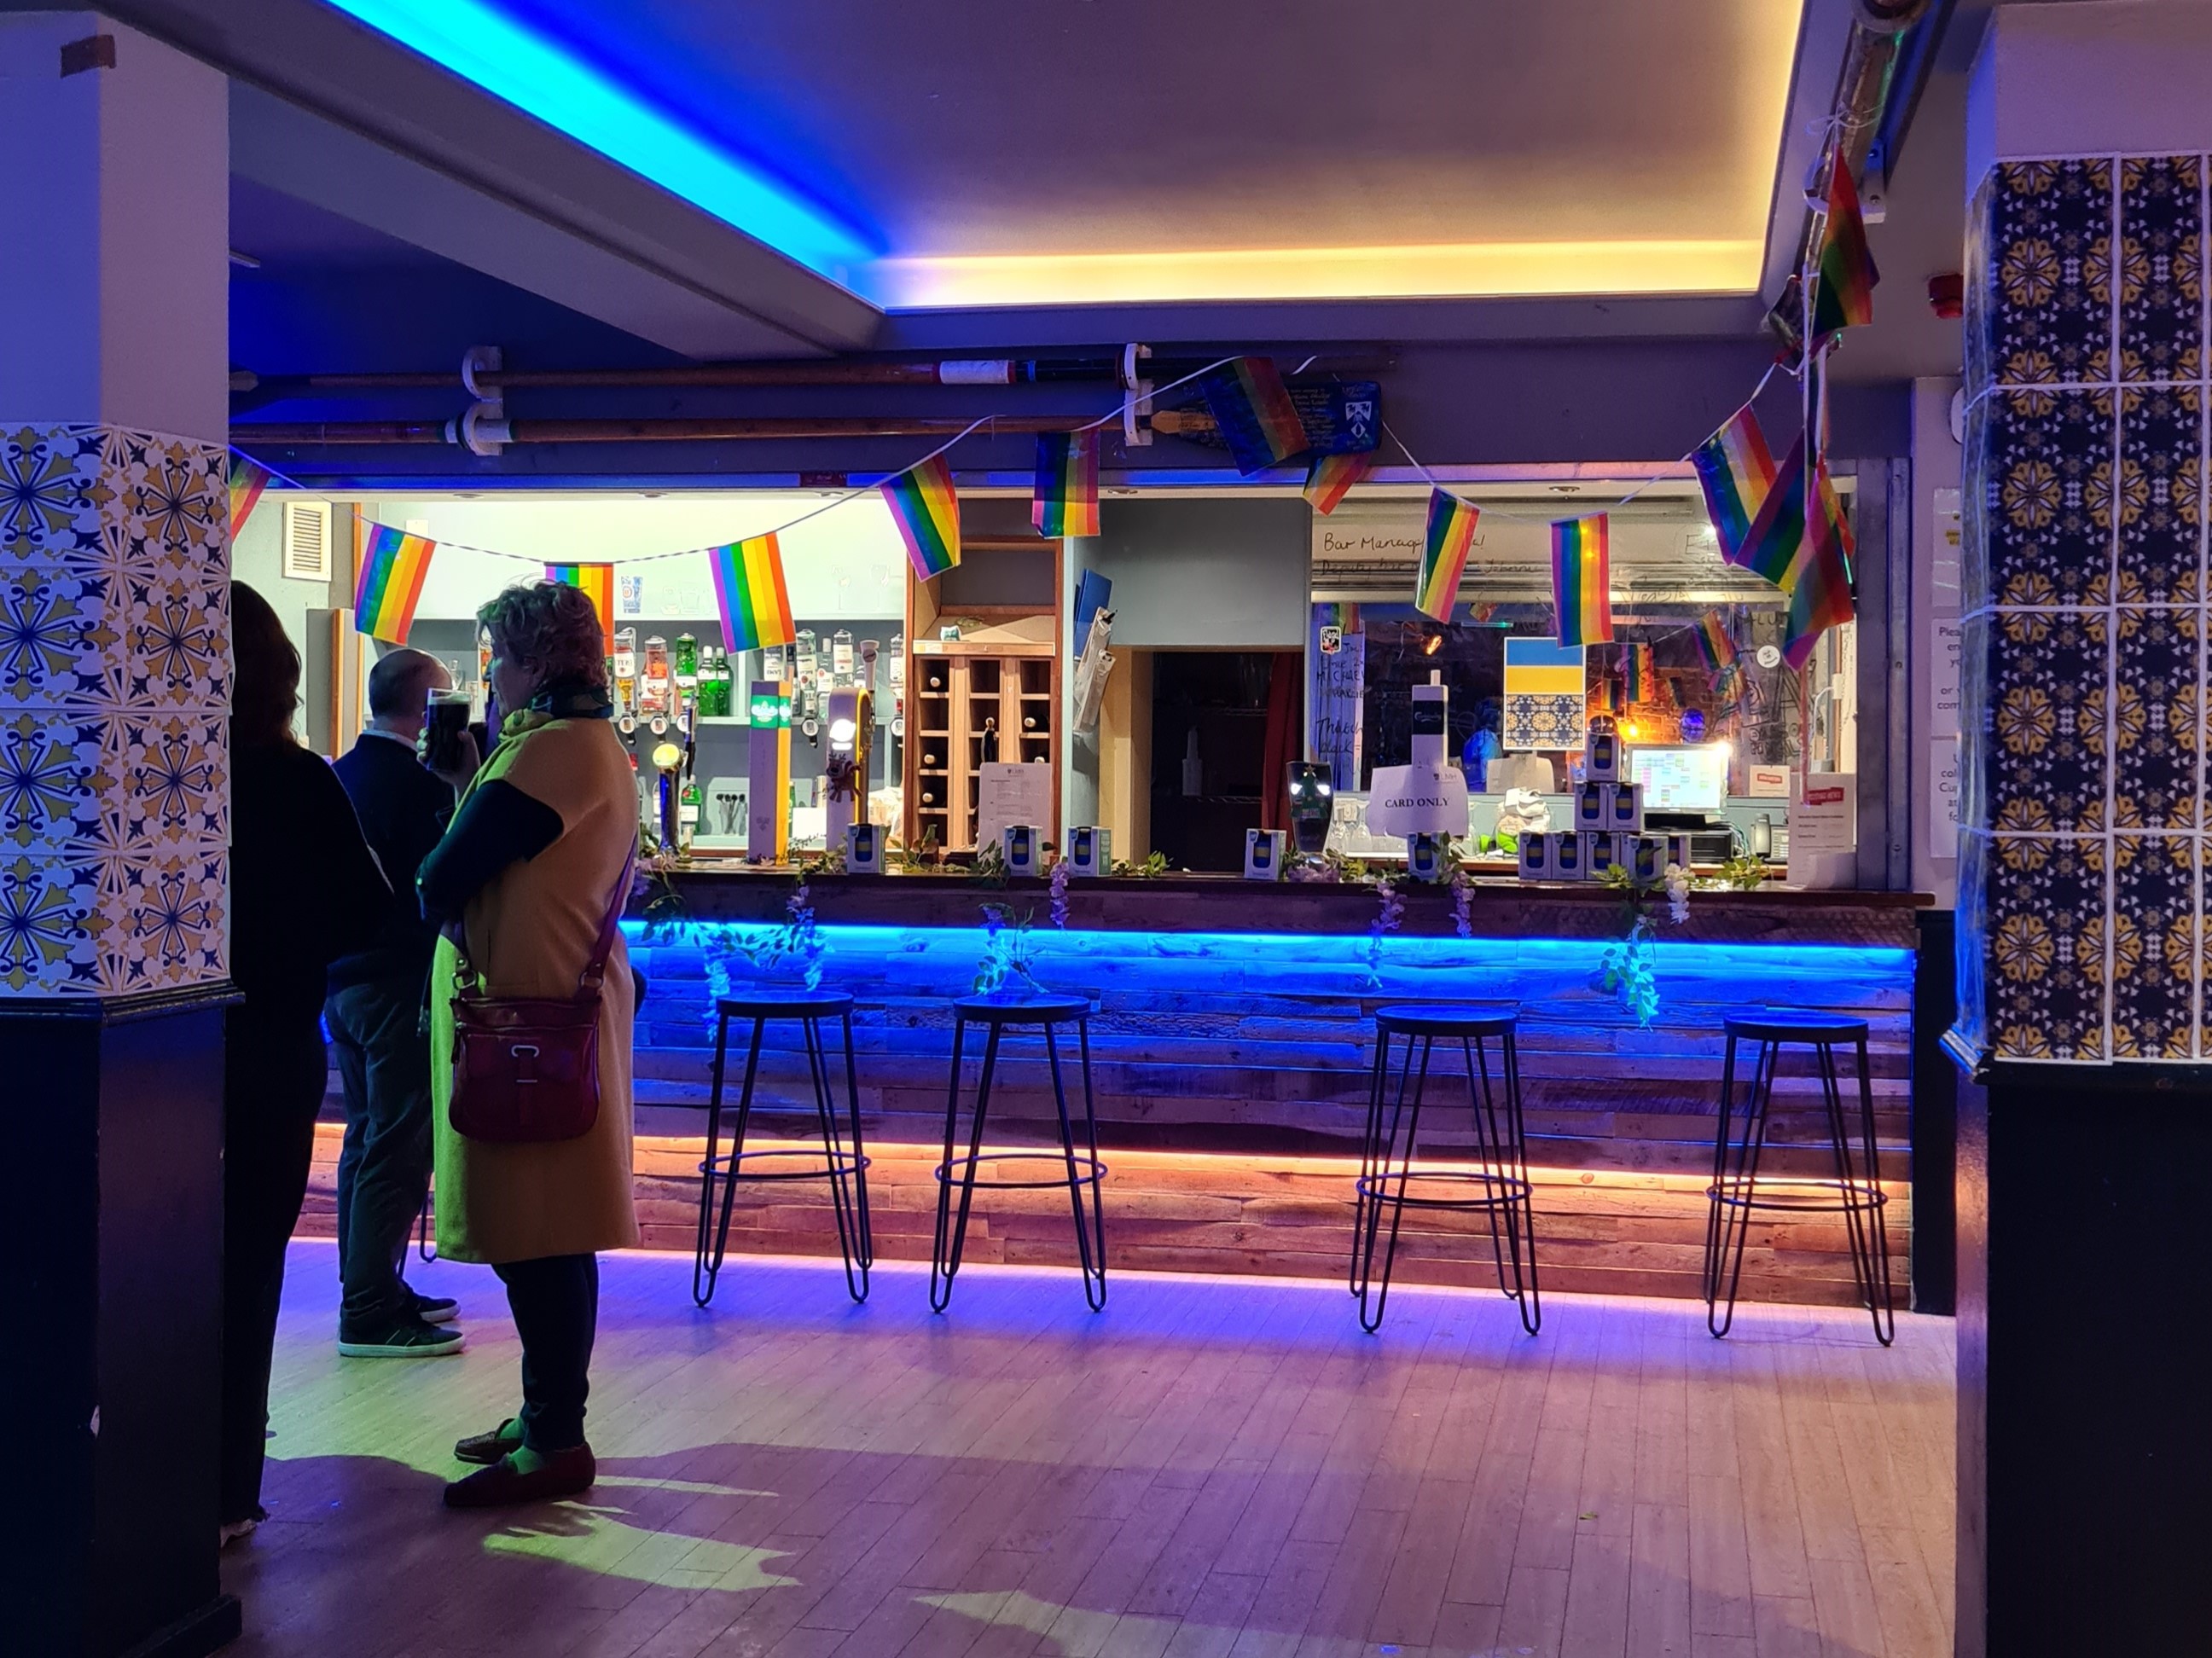 Photo of people standing in a bar with blue lighting